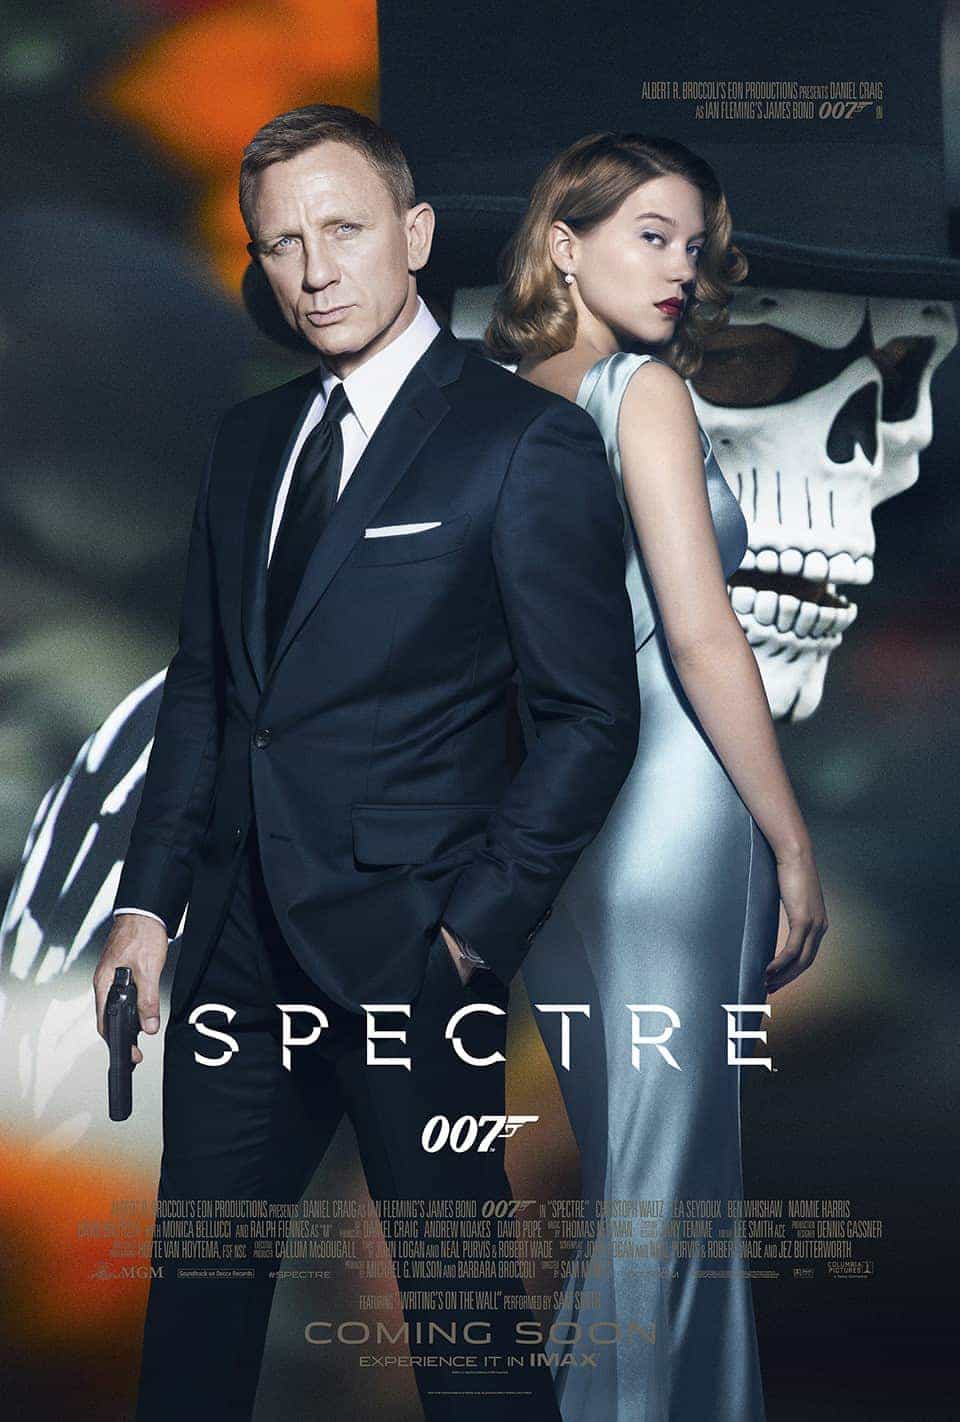 World Box Office Chart Weekending 8th November 2015:  Spectre continues to take over the world